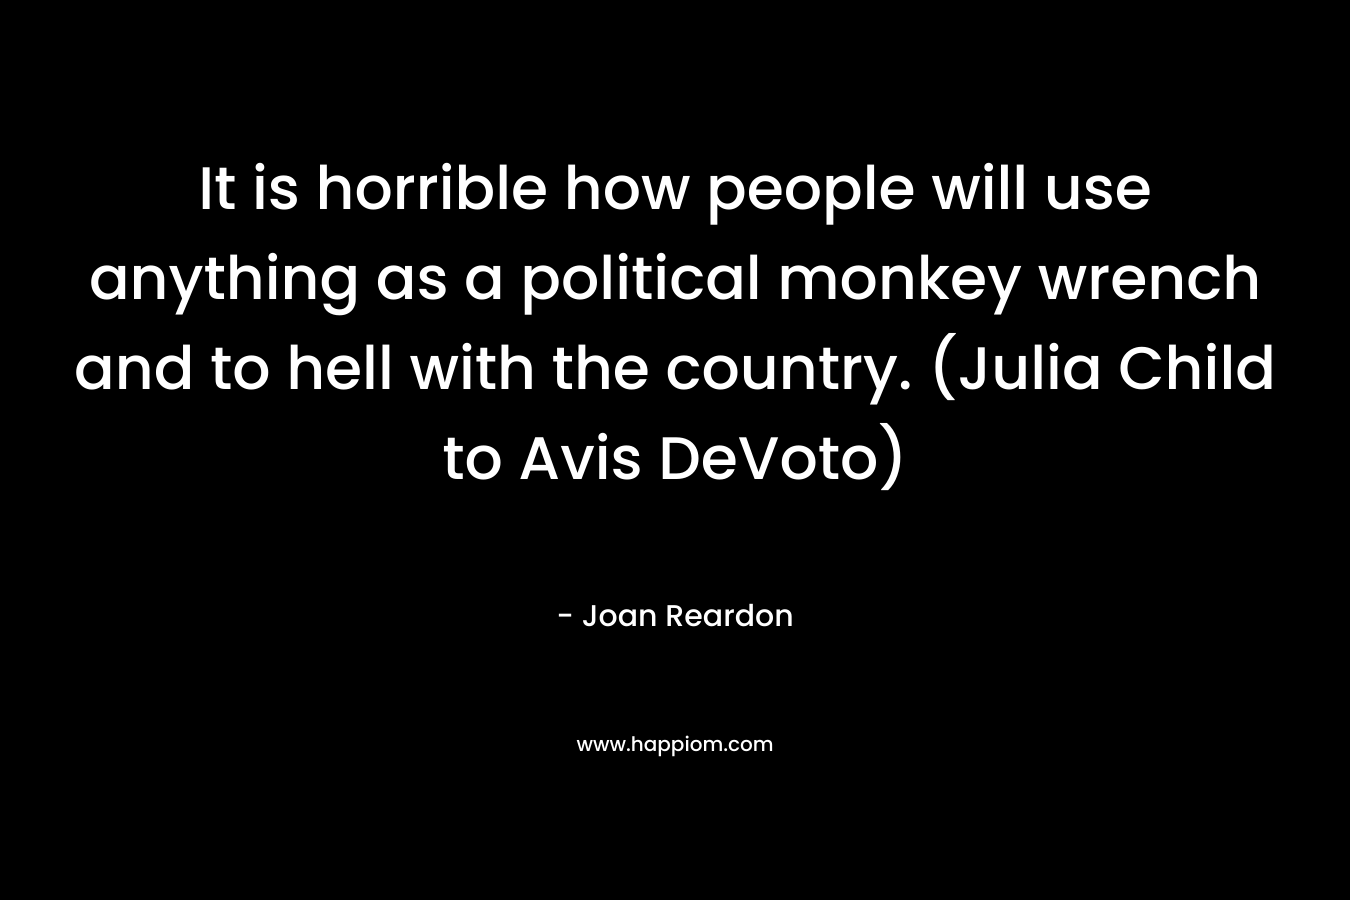 It is horrible how people will use anything as a political monkey wrench and to hell with the country. (Julia Child to Avis DeVoto)